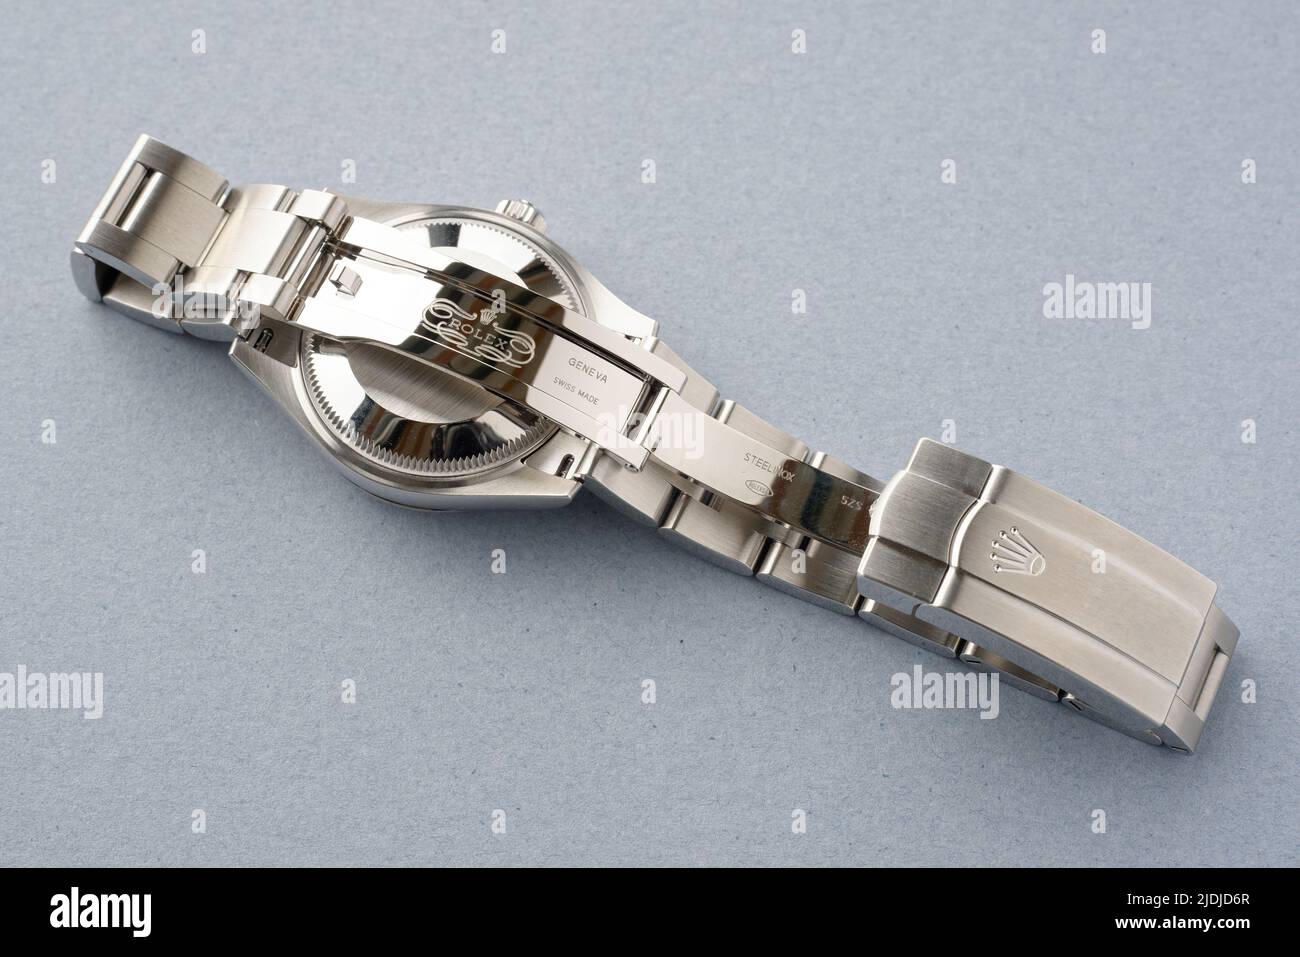 The back of a Rolex wristwatch showing the metal bracelet strap. Stock Photo